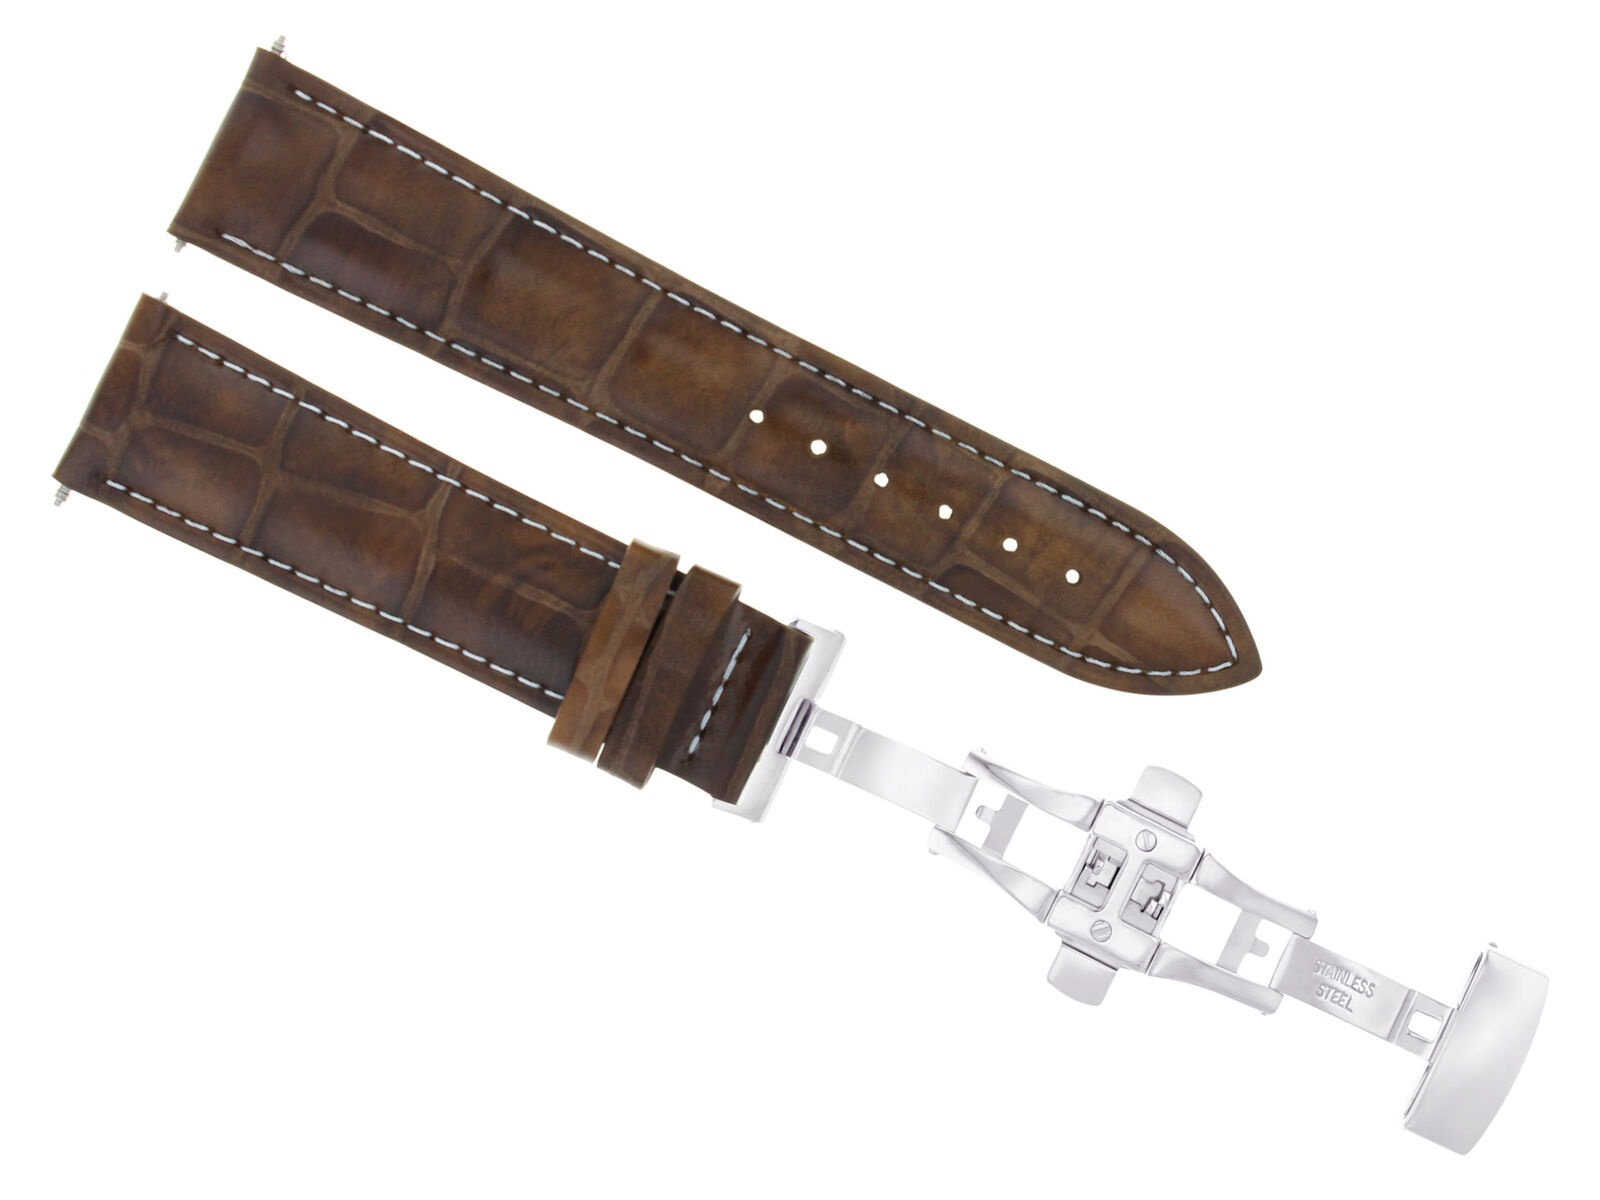 19MM LEATHER STRAP WATCH BAND FOR TAG HEUER CARREERA WATCH DEPLOY CLASP L/BROWN